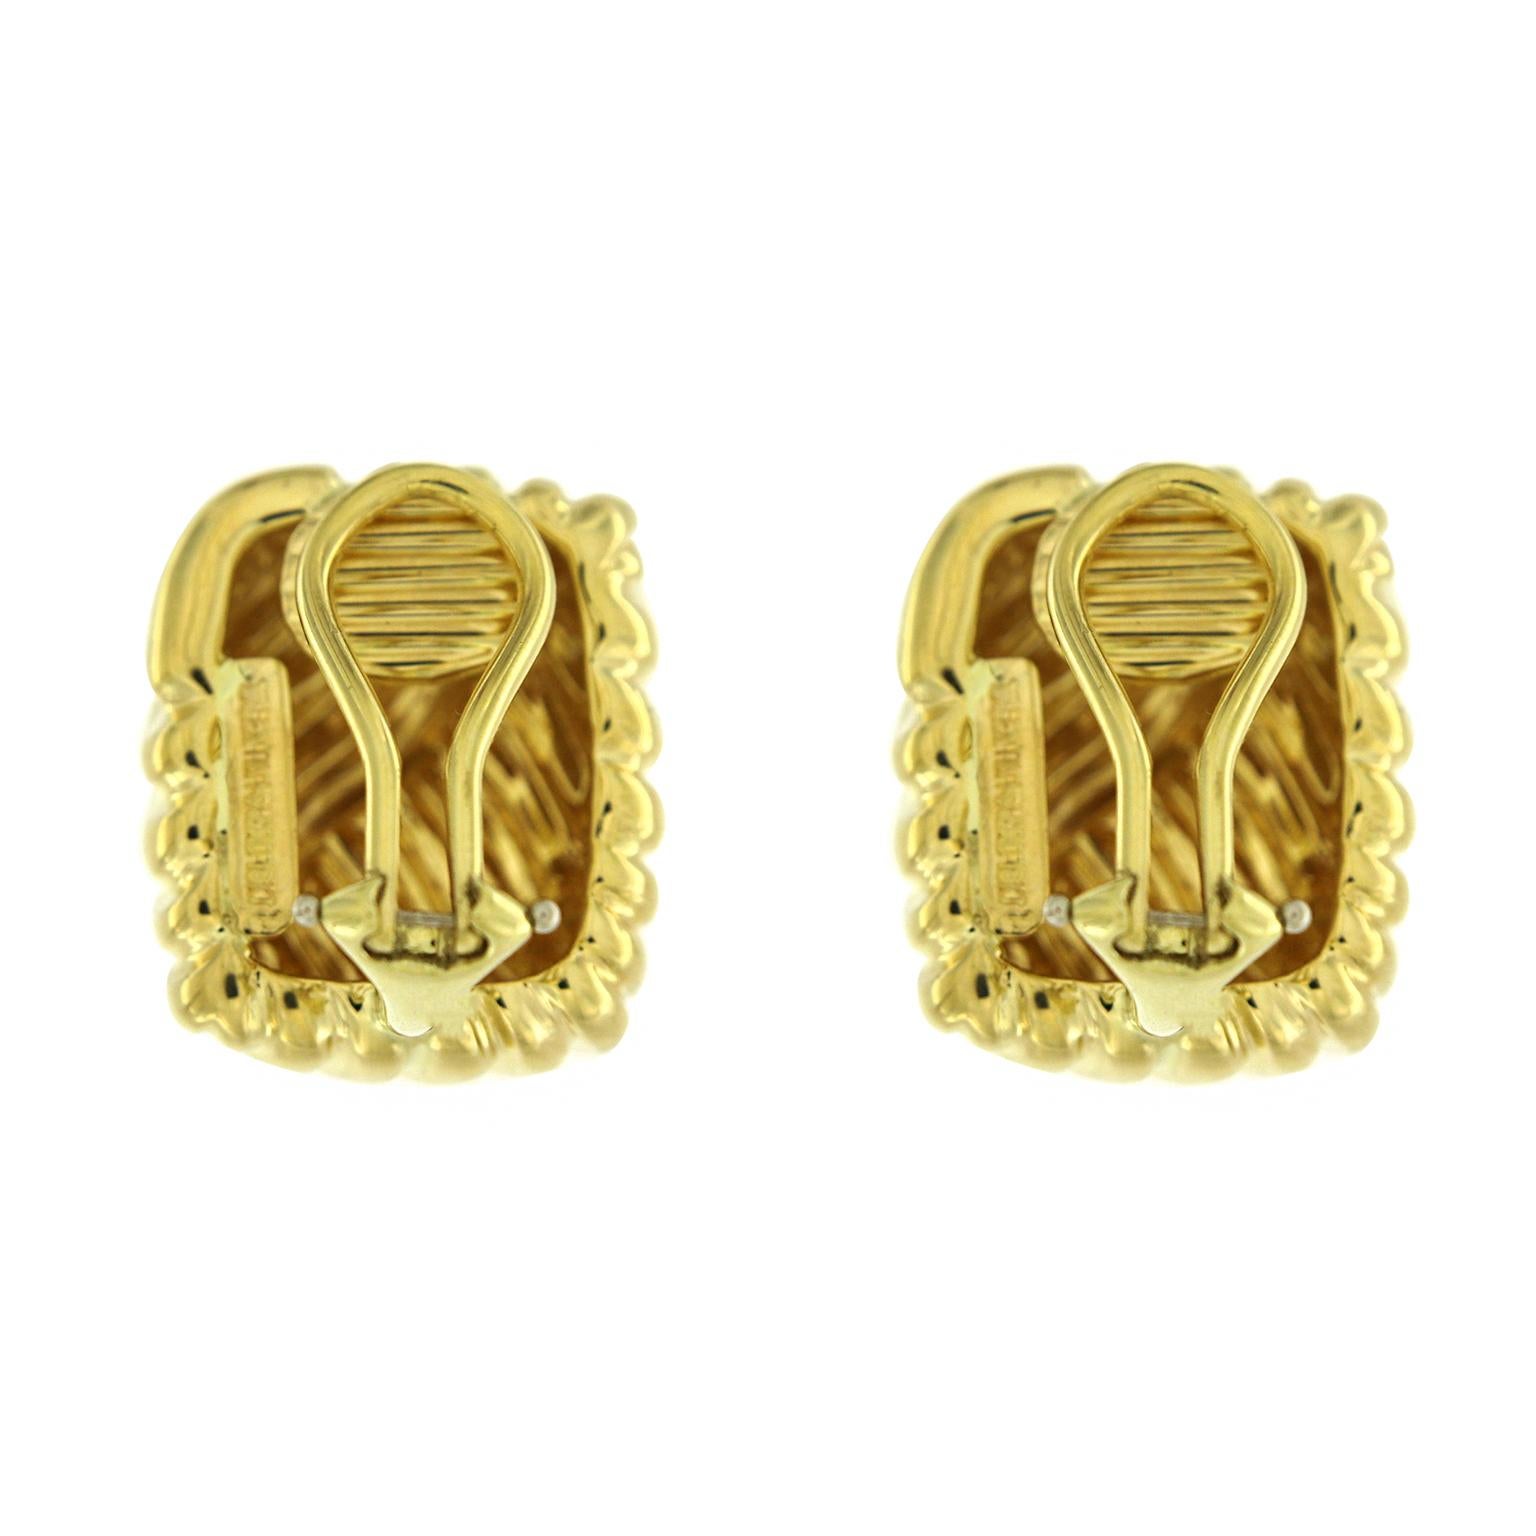 Valentin Magro 18 Karat Yellow Gold Square Wave Earrings seem to dance. Each earring features two right triangles joined to form a square. The two halves groove in different directions, adding variety to the design. Their gold shines bright,